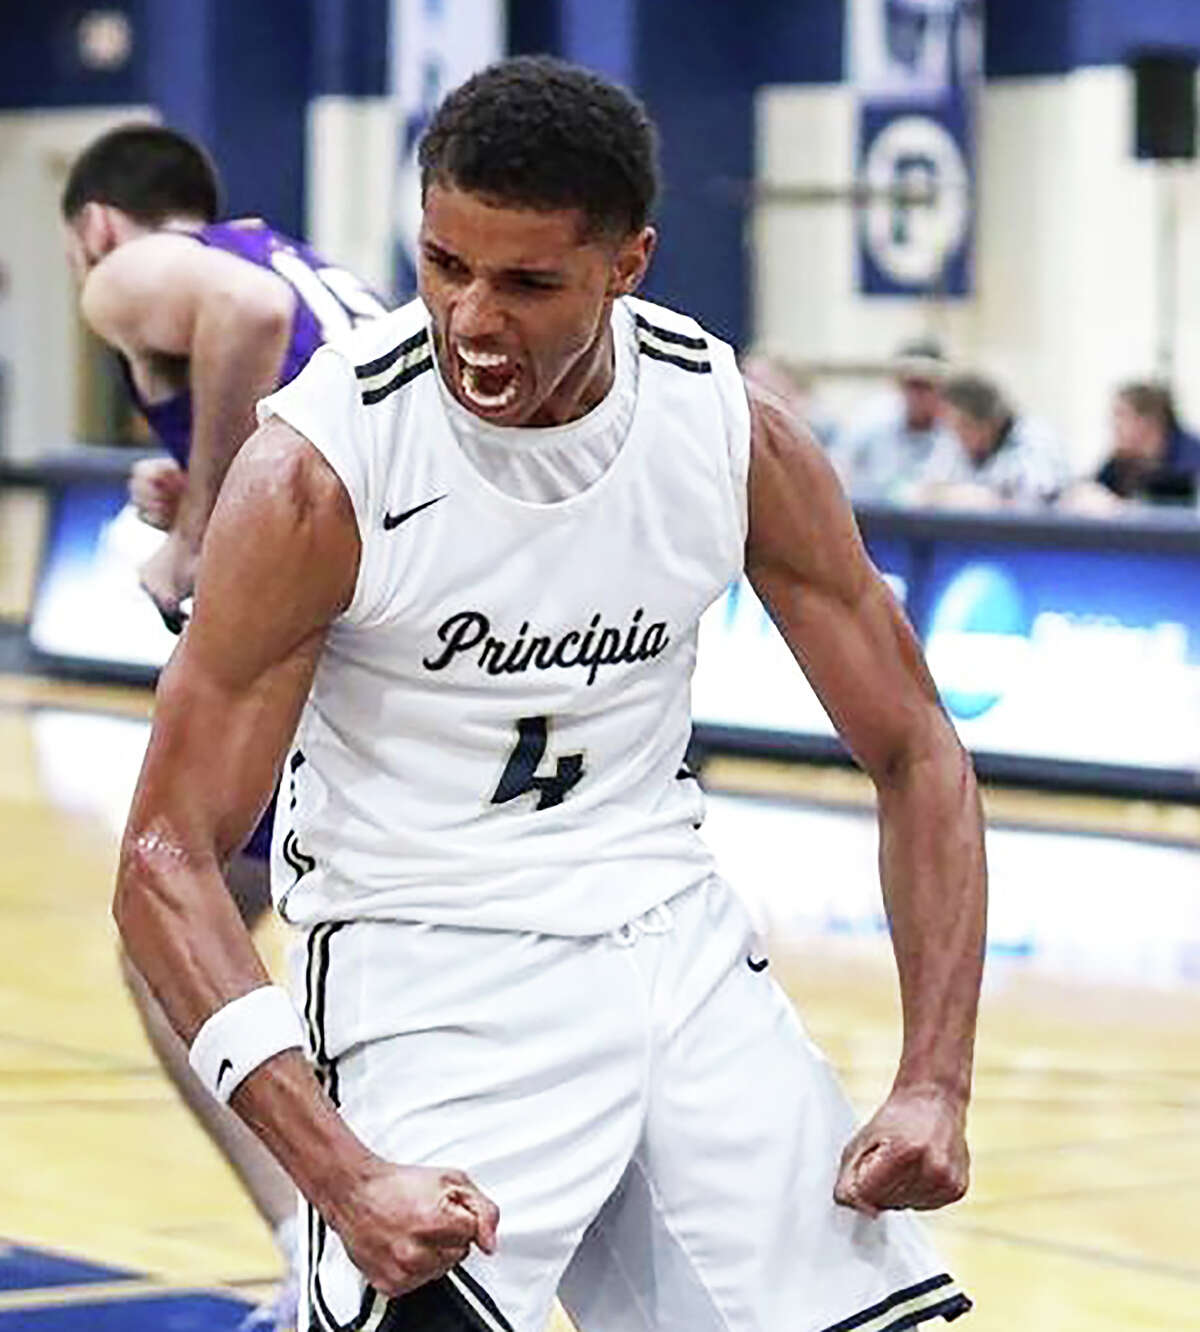 Jaquan Adams of Principia College reacts after a basket this season in Elsah. Adams is a graduate of Civic Memorial High and Lewis and Clark Community College.